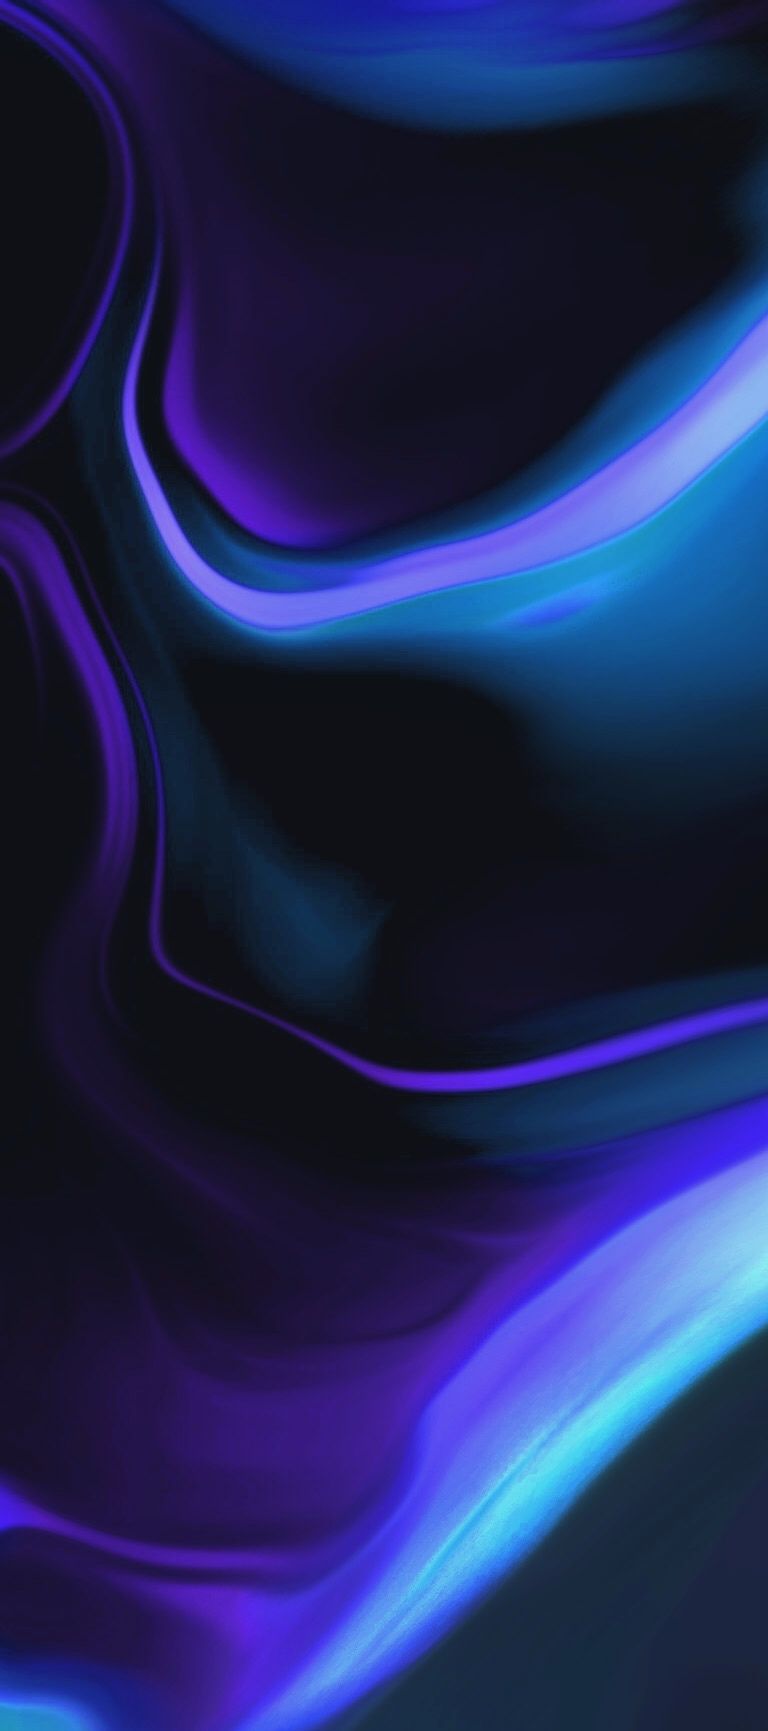 The Purple and black. Samsung wallpaper, Background phone wallpaper, Abstract